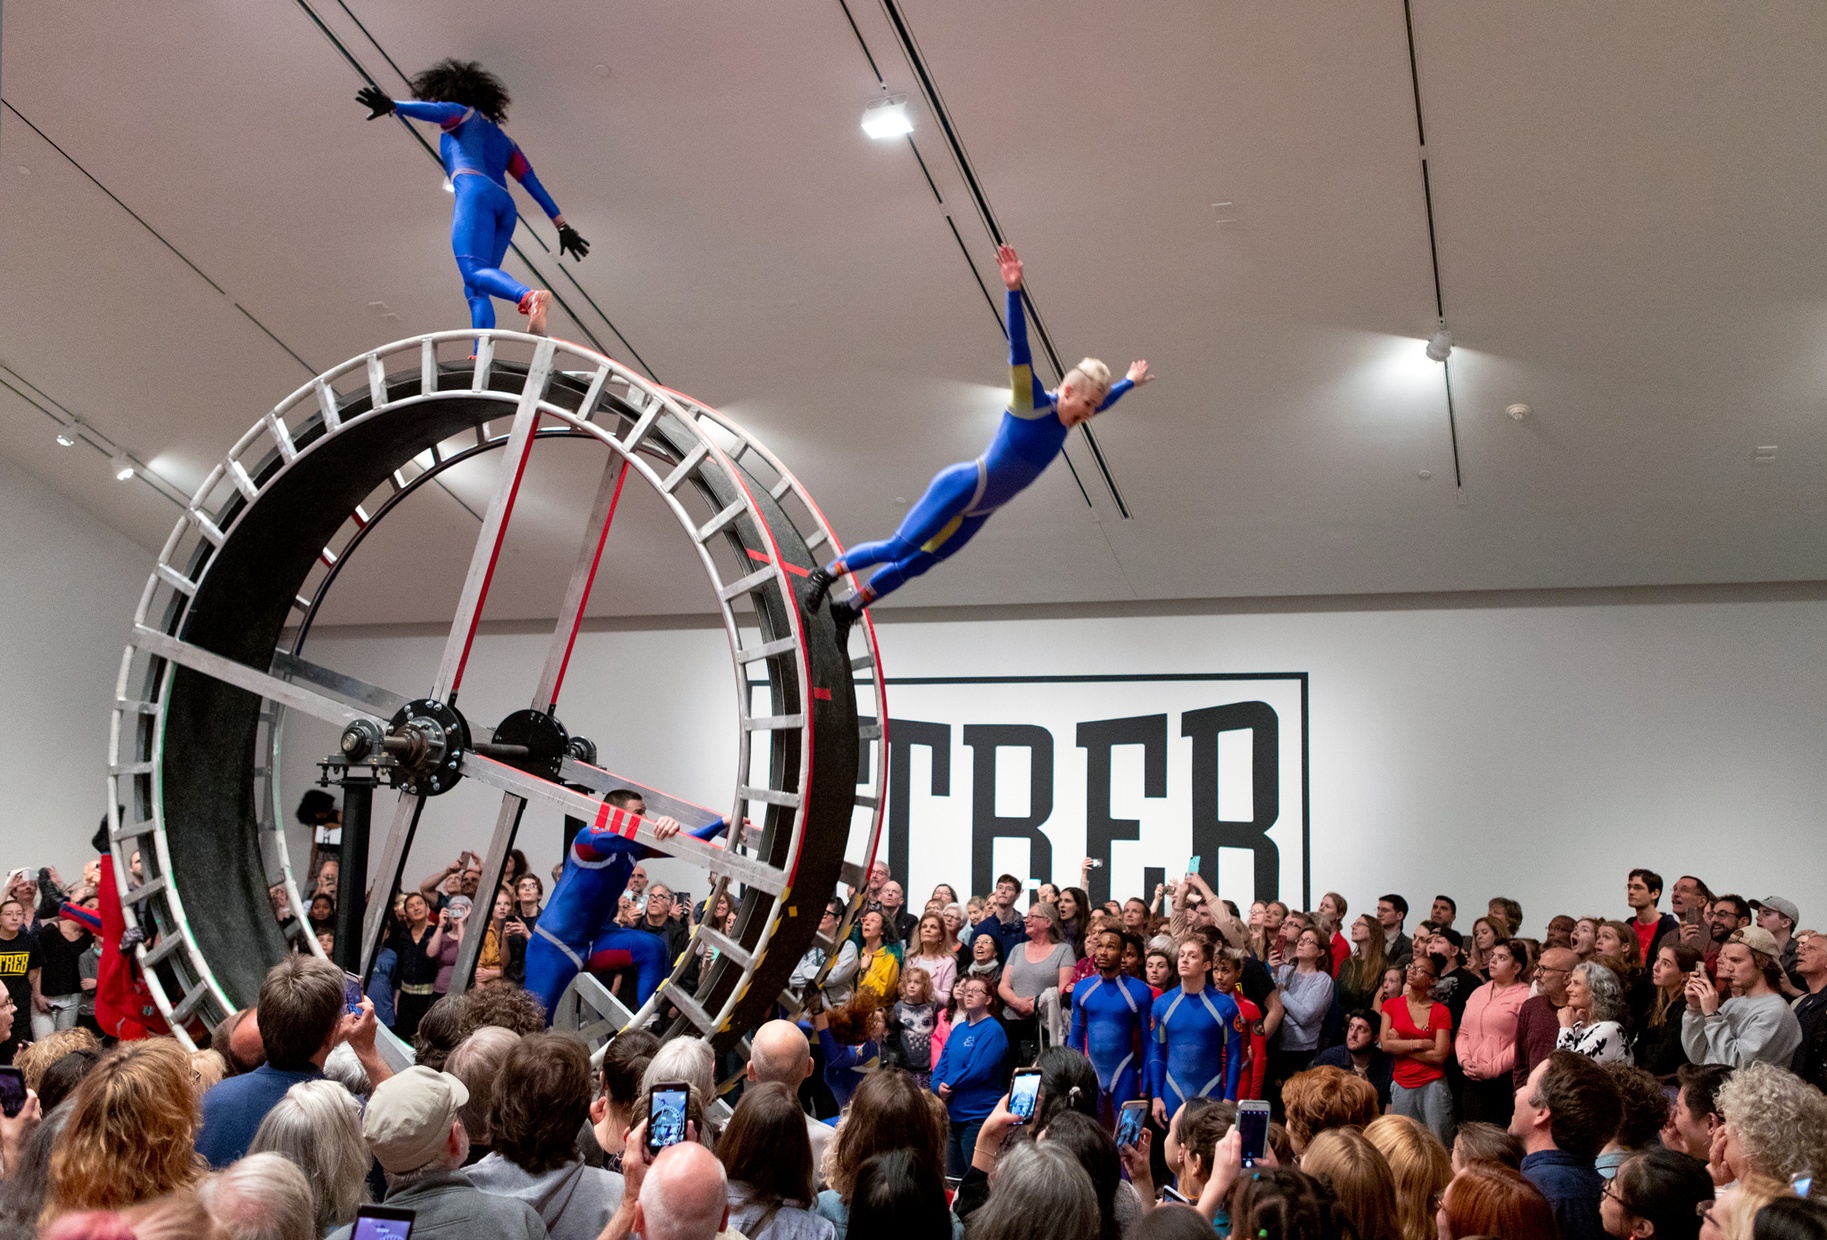 A dancer flies off a giant hamster wheel before a standing-room-only crowd